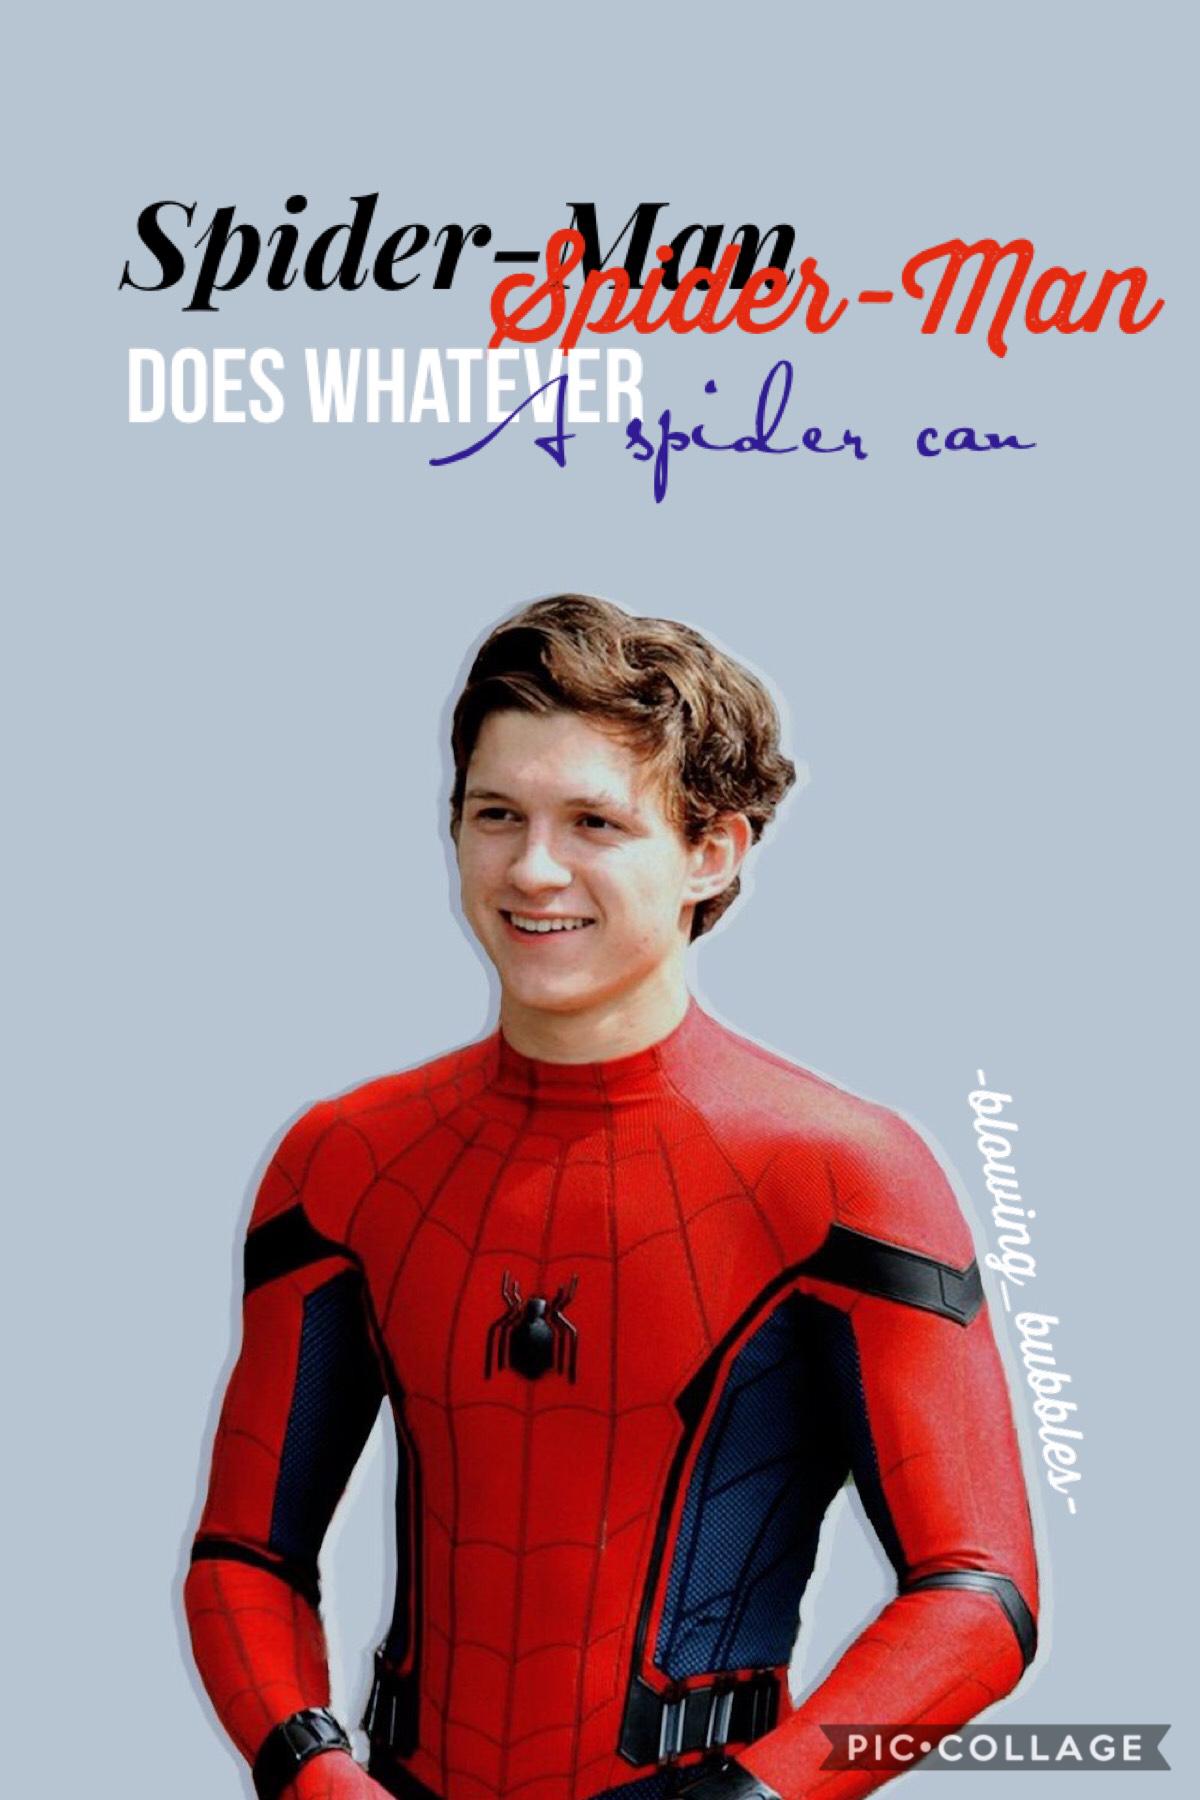 Tom Holland my Bae ♥️


I’m absolutely tired cause I’ve worked with kids the last two days from 9-3


This was my screensaver for a while but people laughed at me so I changed it 😂😂😂

QOTD: tom Holland or Zac effron?
AOTD: tom Holland 4 sure 🕷🕸